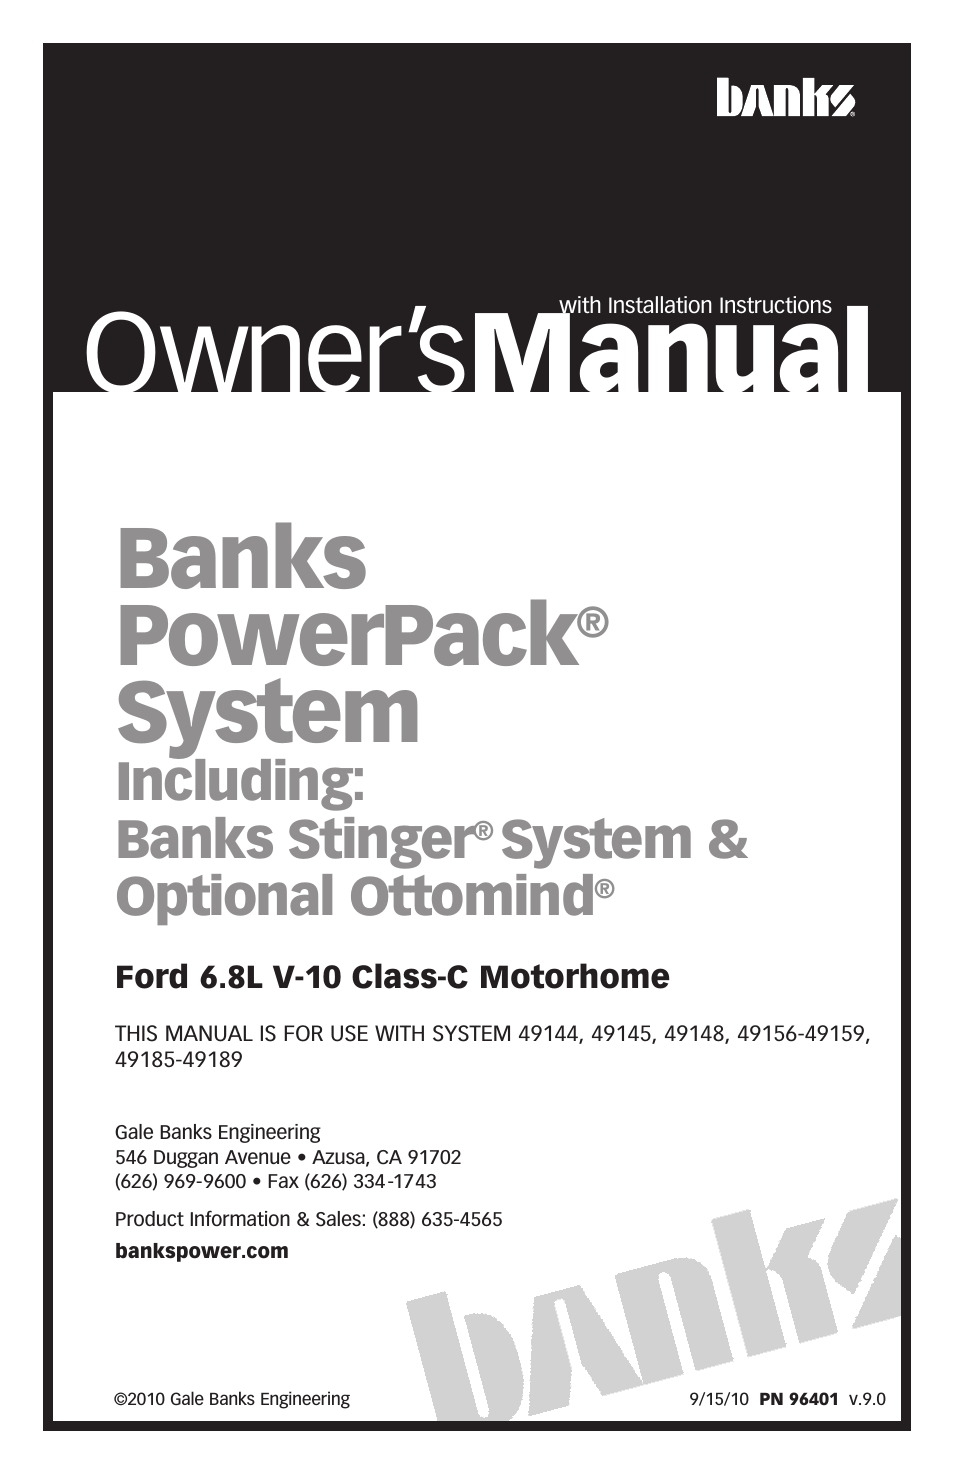 Ford Motorhomes: (Gas ’97 - 04 6.8L Class-C) Power Systems- PowerPack & Stinger Systems & Optional OttoMind (Class-C)